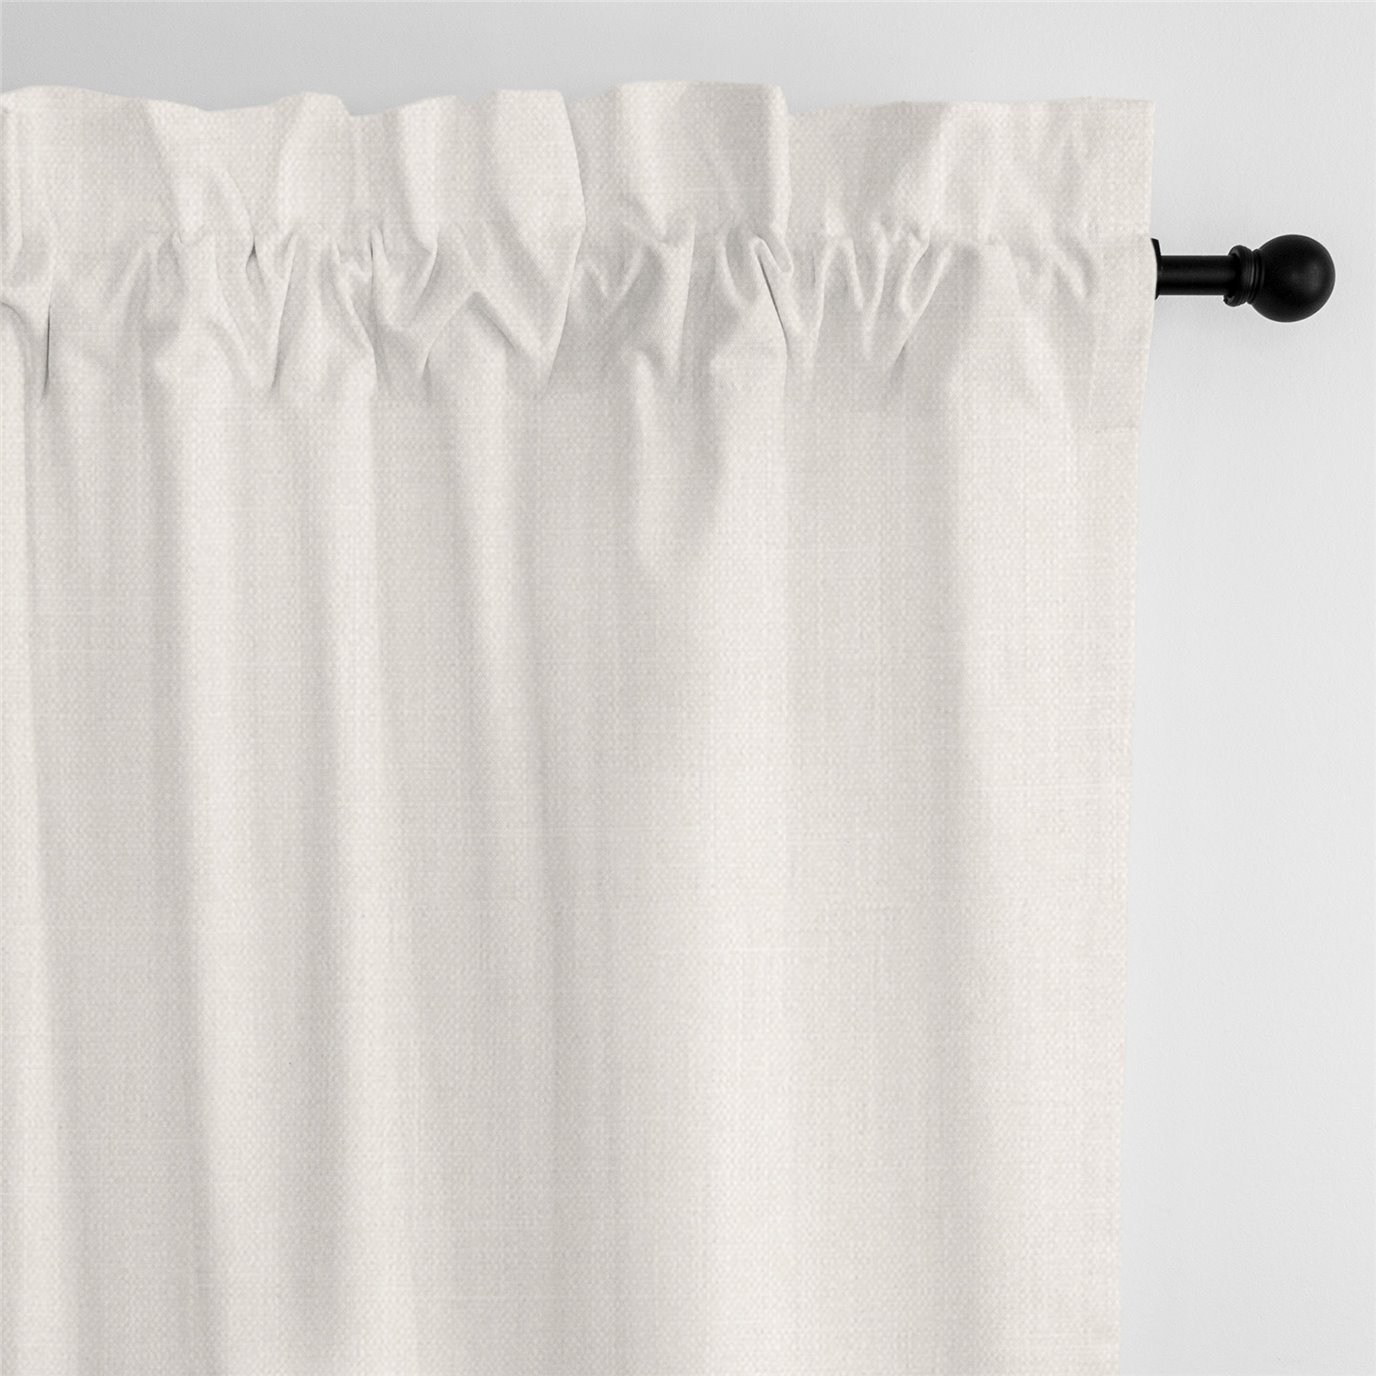 Sutton Pearl Pole Top Drapery Panel - Pair - Size 50"x144"